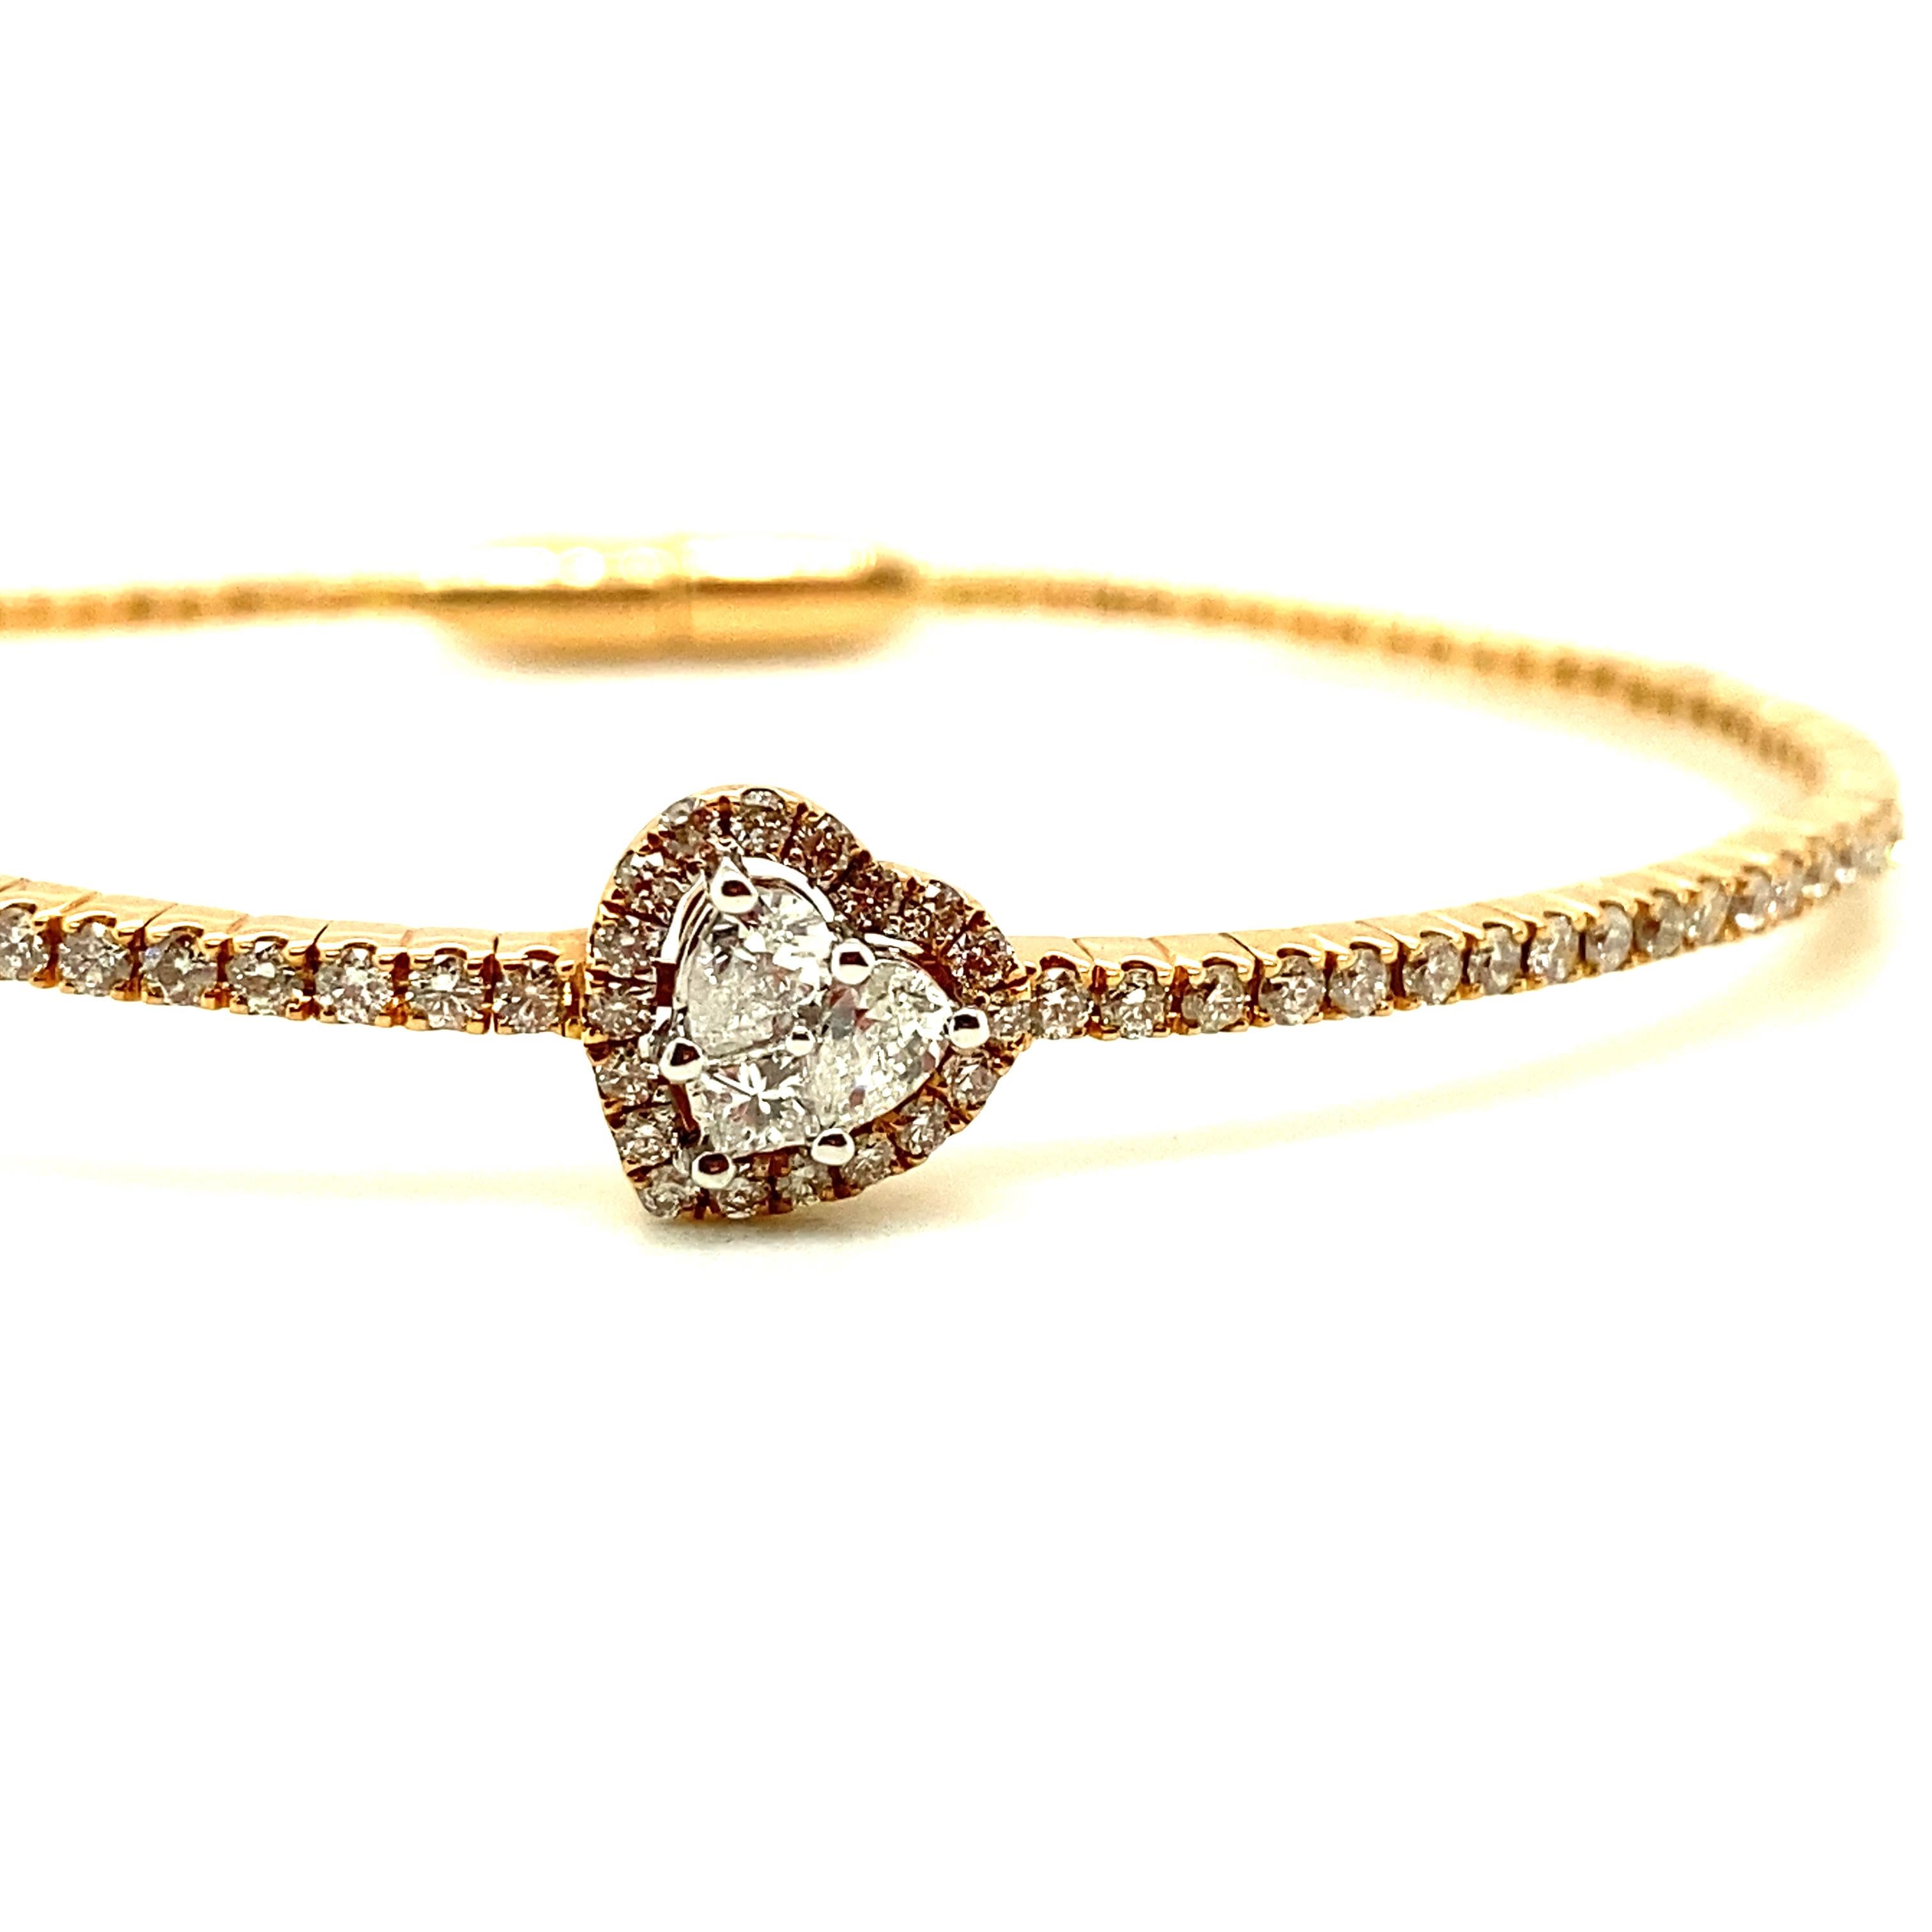 White Diamond and Rose Gold Bracelet:

An elegant bracelet, it features a cluster of mix-shape diamonds situated in the centre with round-brilliant cut diamonds extending to half of the body weighing a total of 0.73 carat. The diamonds are of fine